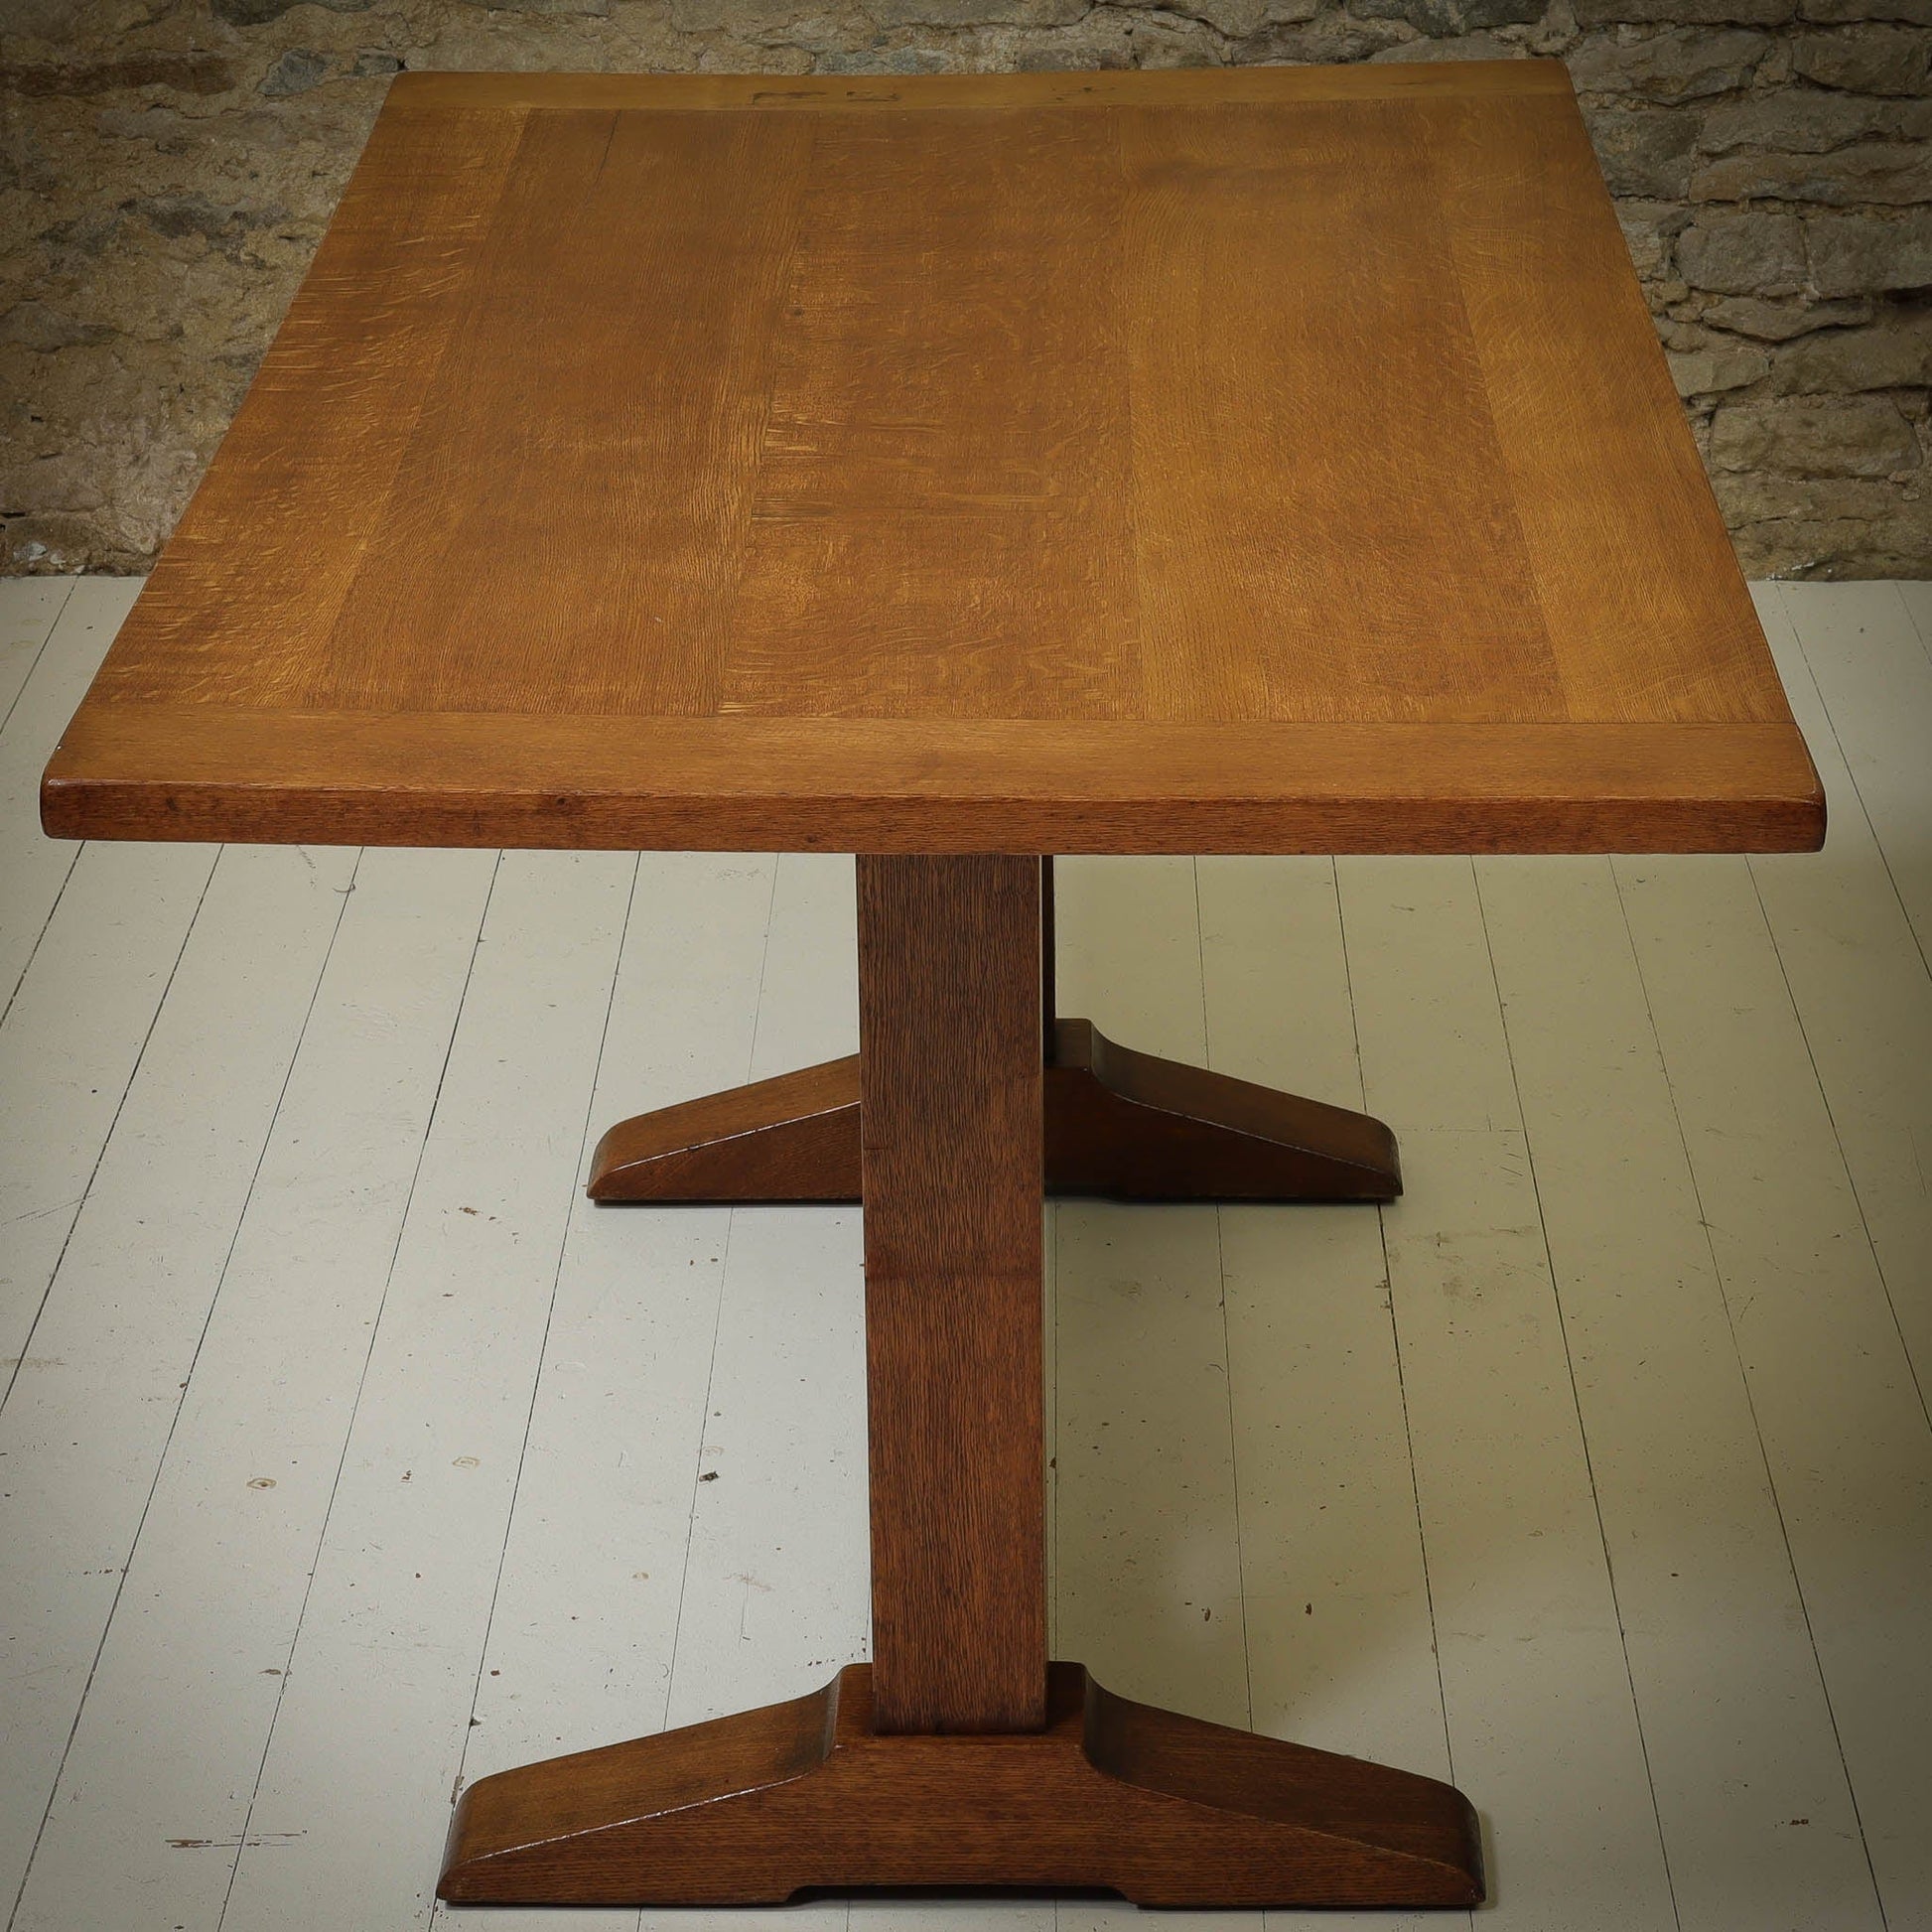 Heal and Co Arts & Crafts Cotswold School English Oak Dining Table c. 1930